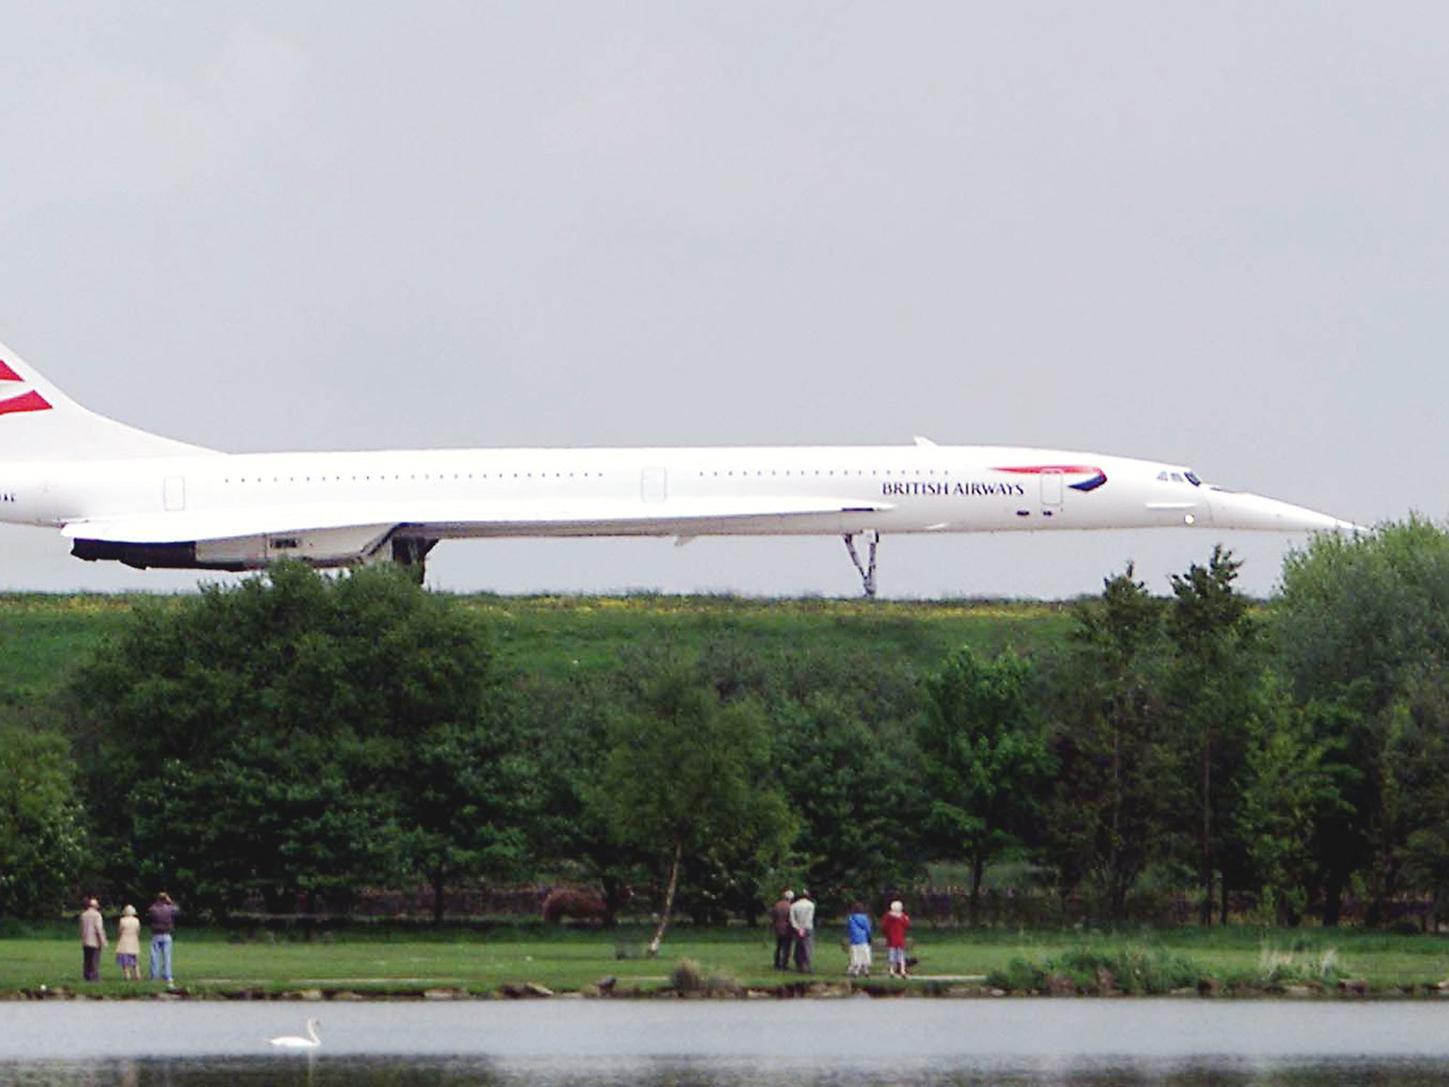 Share your memories of Concorde at Leeds Bradford Airport through the years with Andrew Hutchinson at: andrew.hutchinson@jpress.co.uk or tweet him - @AndyHutchYPN